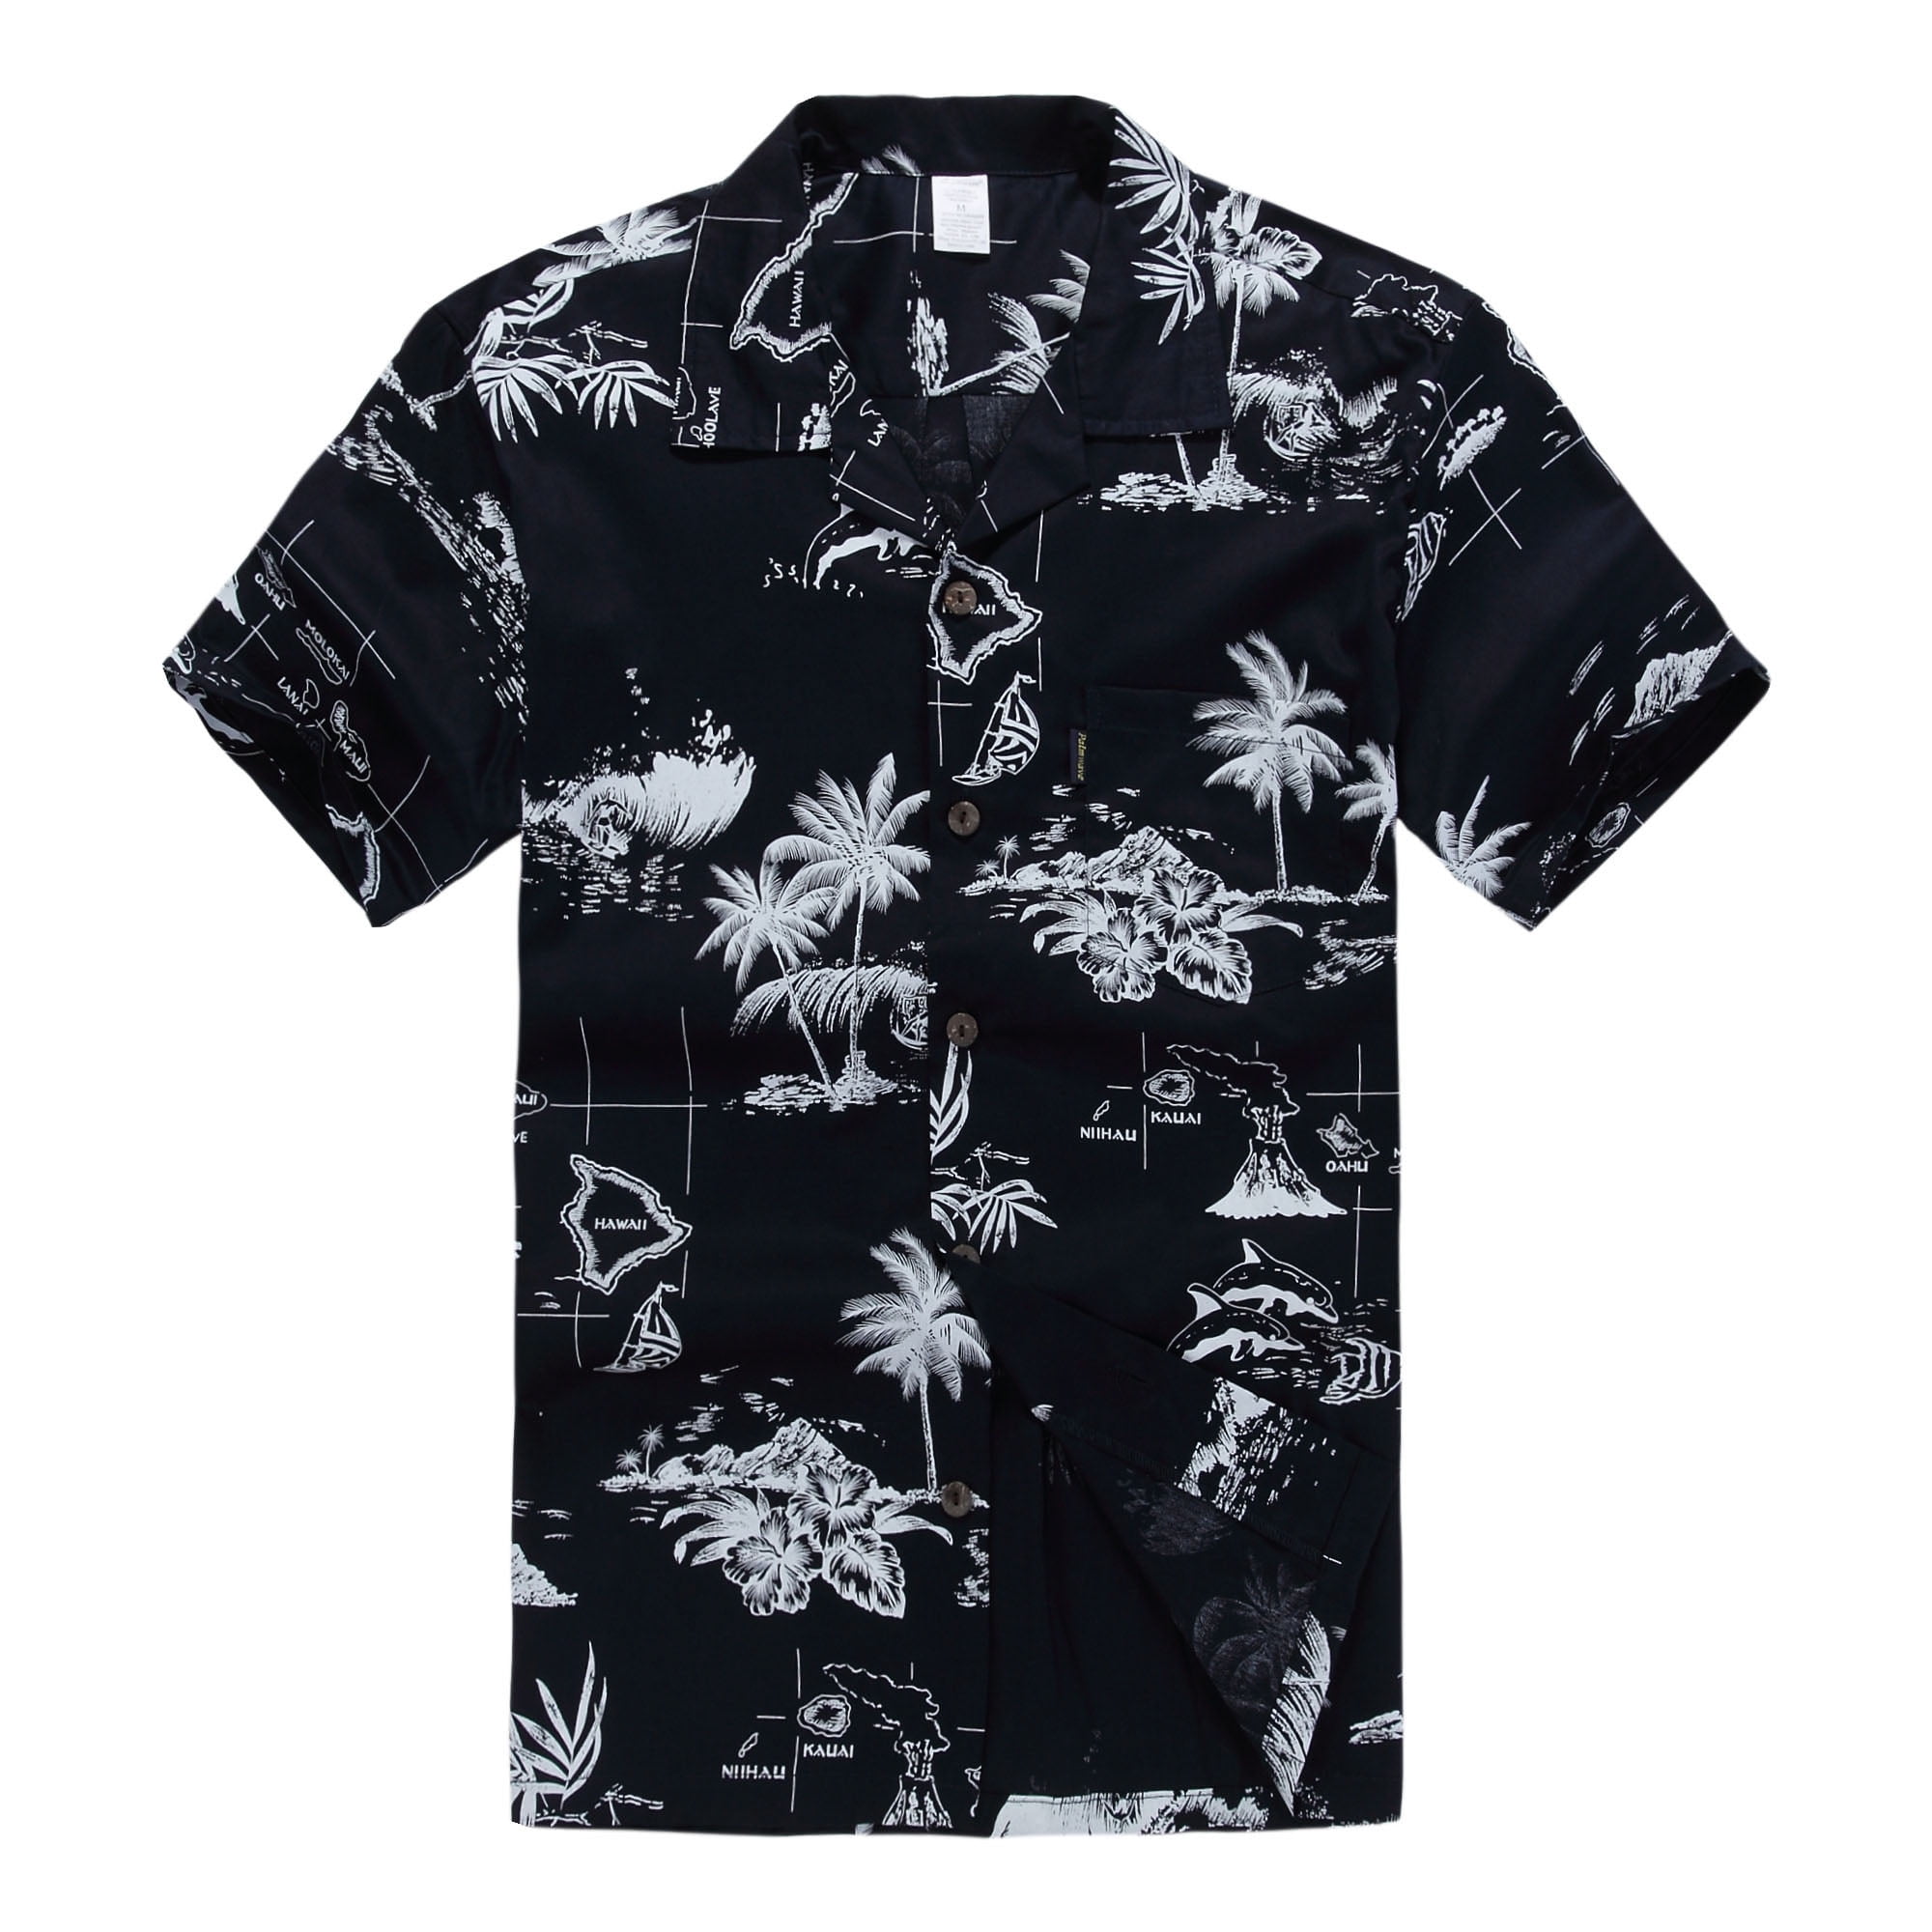 Hawaiian Shirt In Black And White Collectibles Art & Collectibles ...